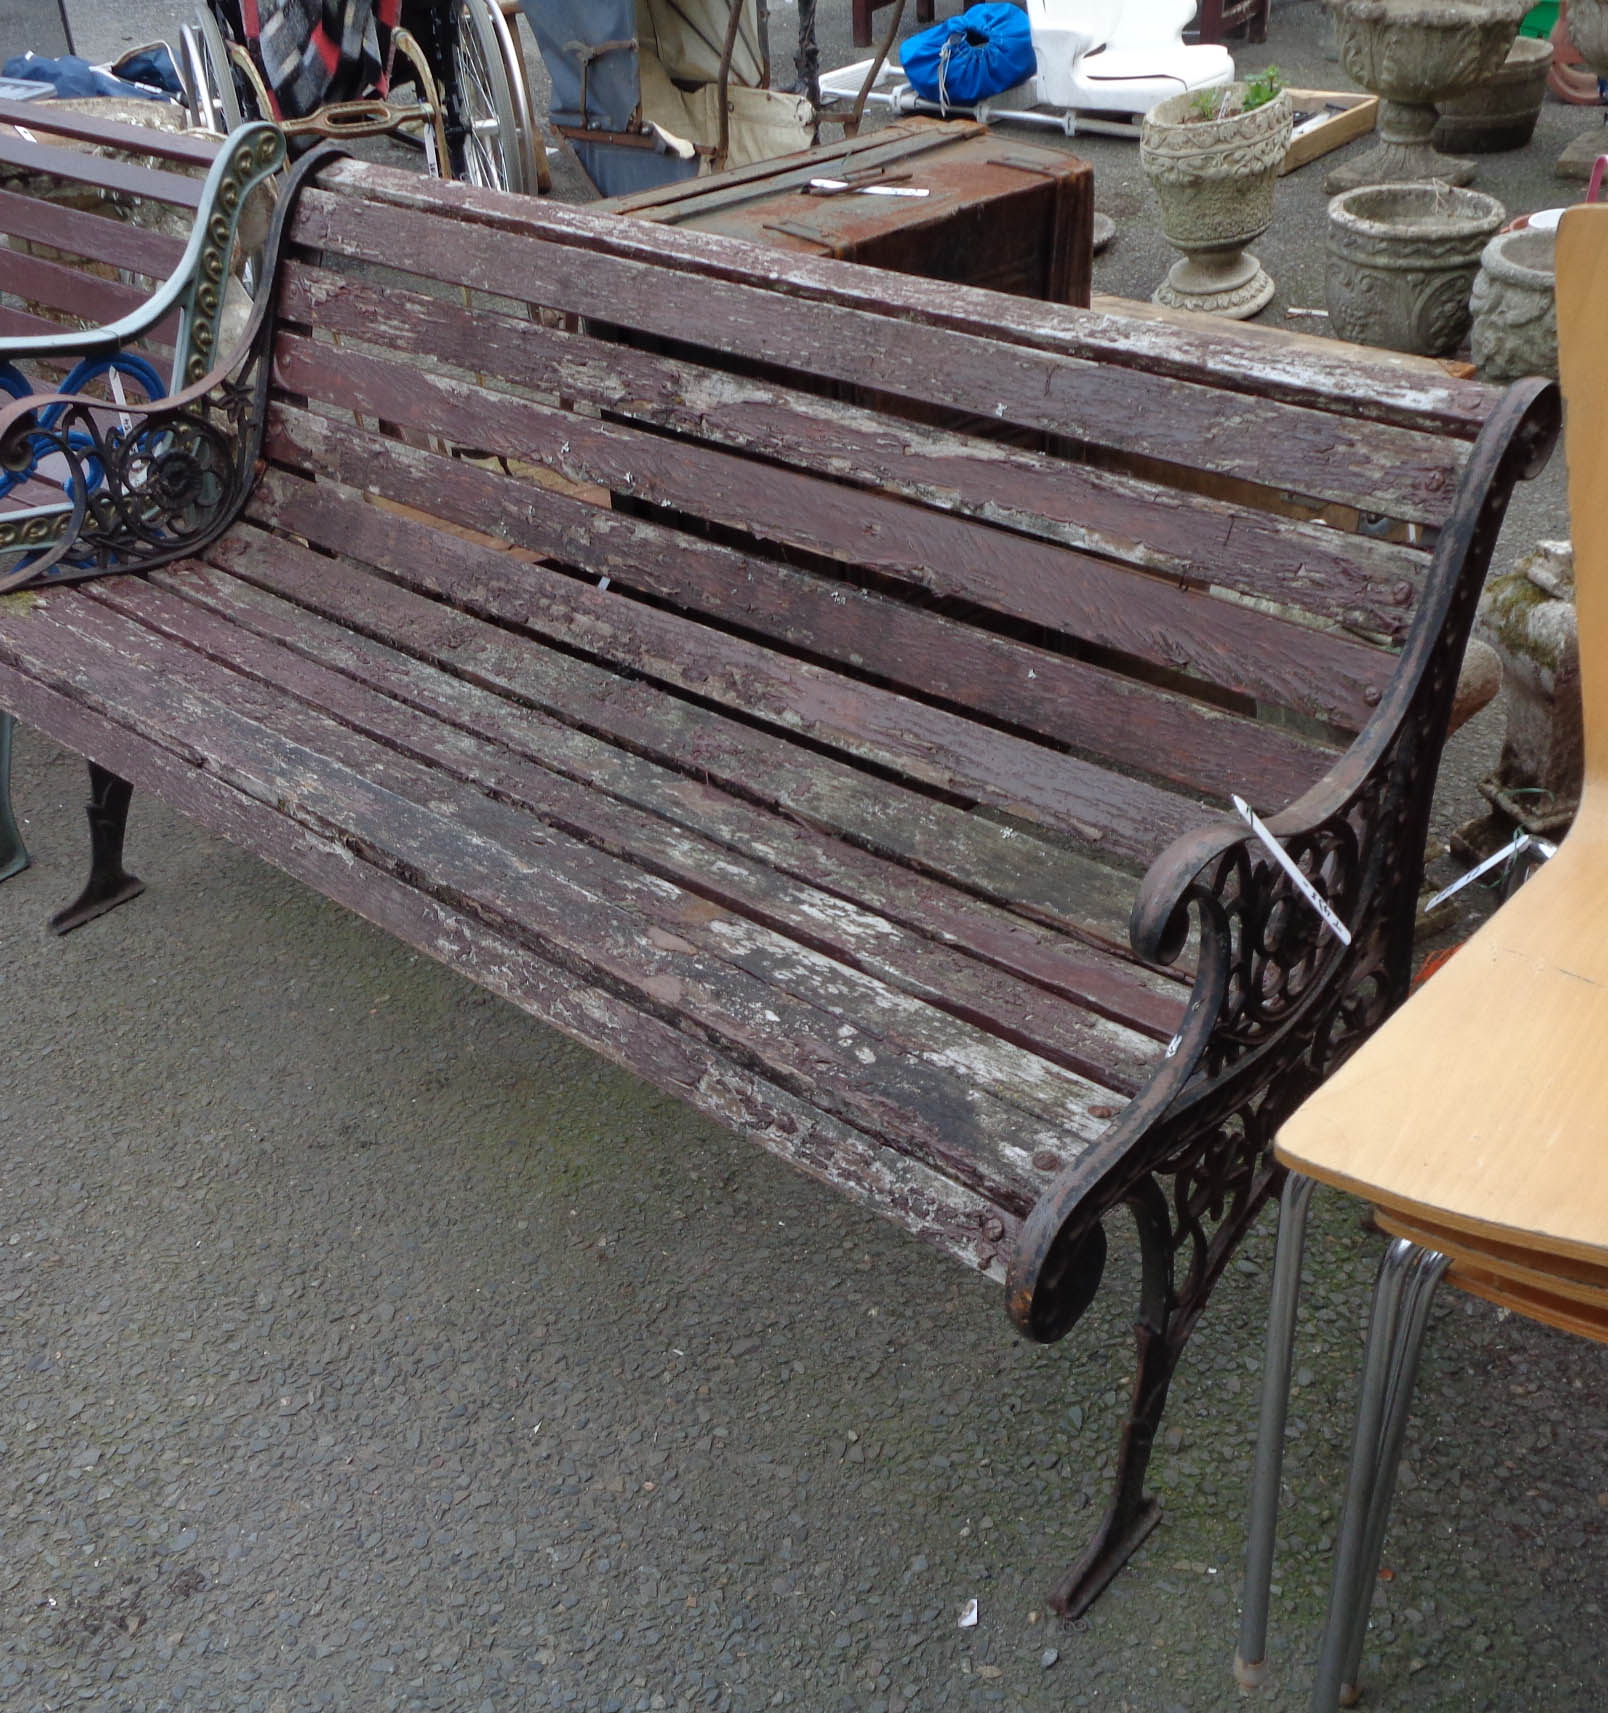 A garden bench with cast iron ends and slatted wooden seat